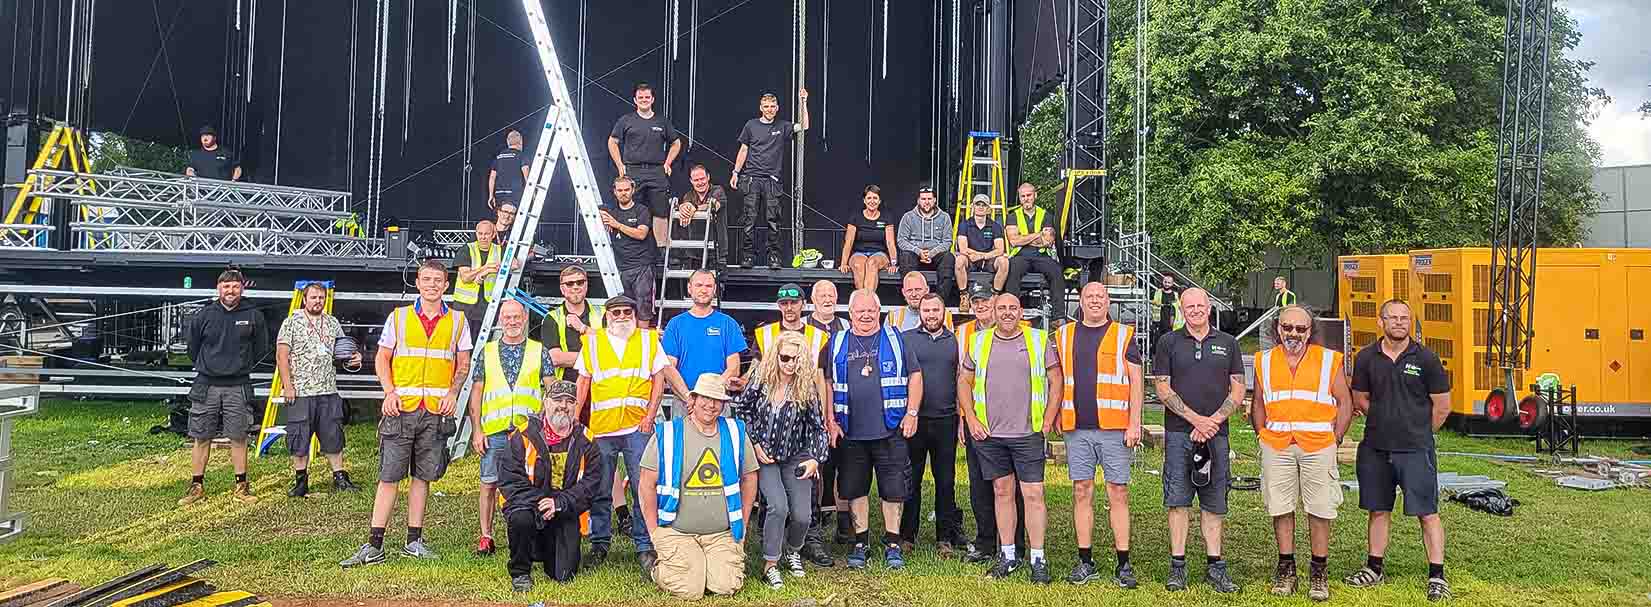 The Cornwall Generator Hire team at a festival